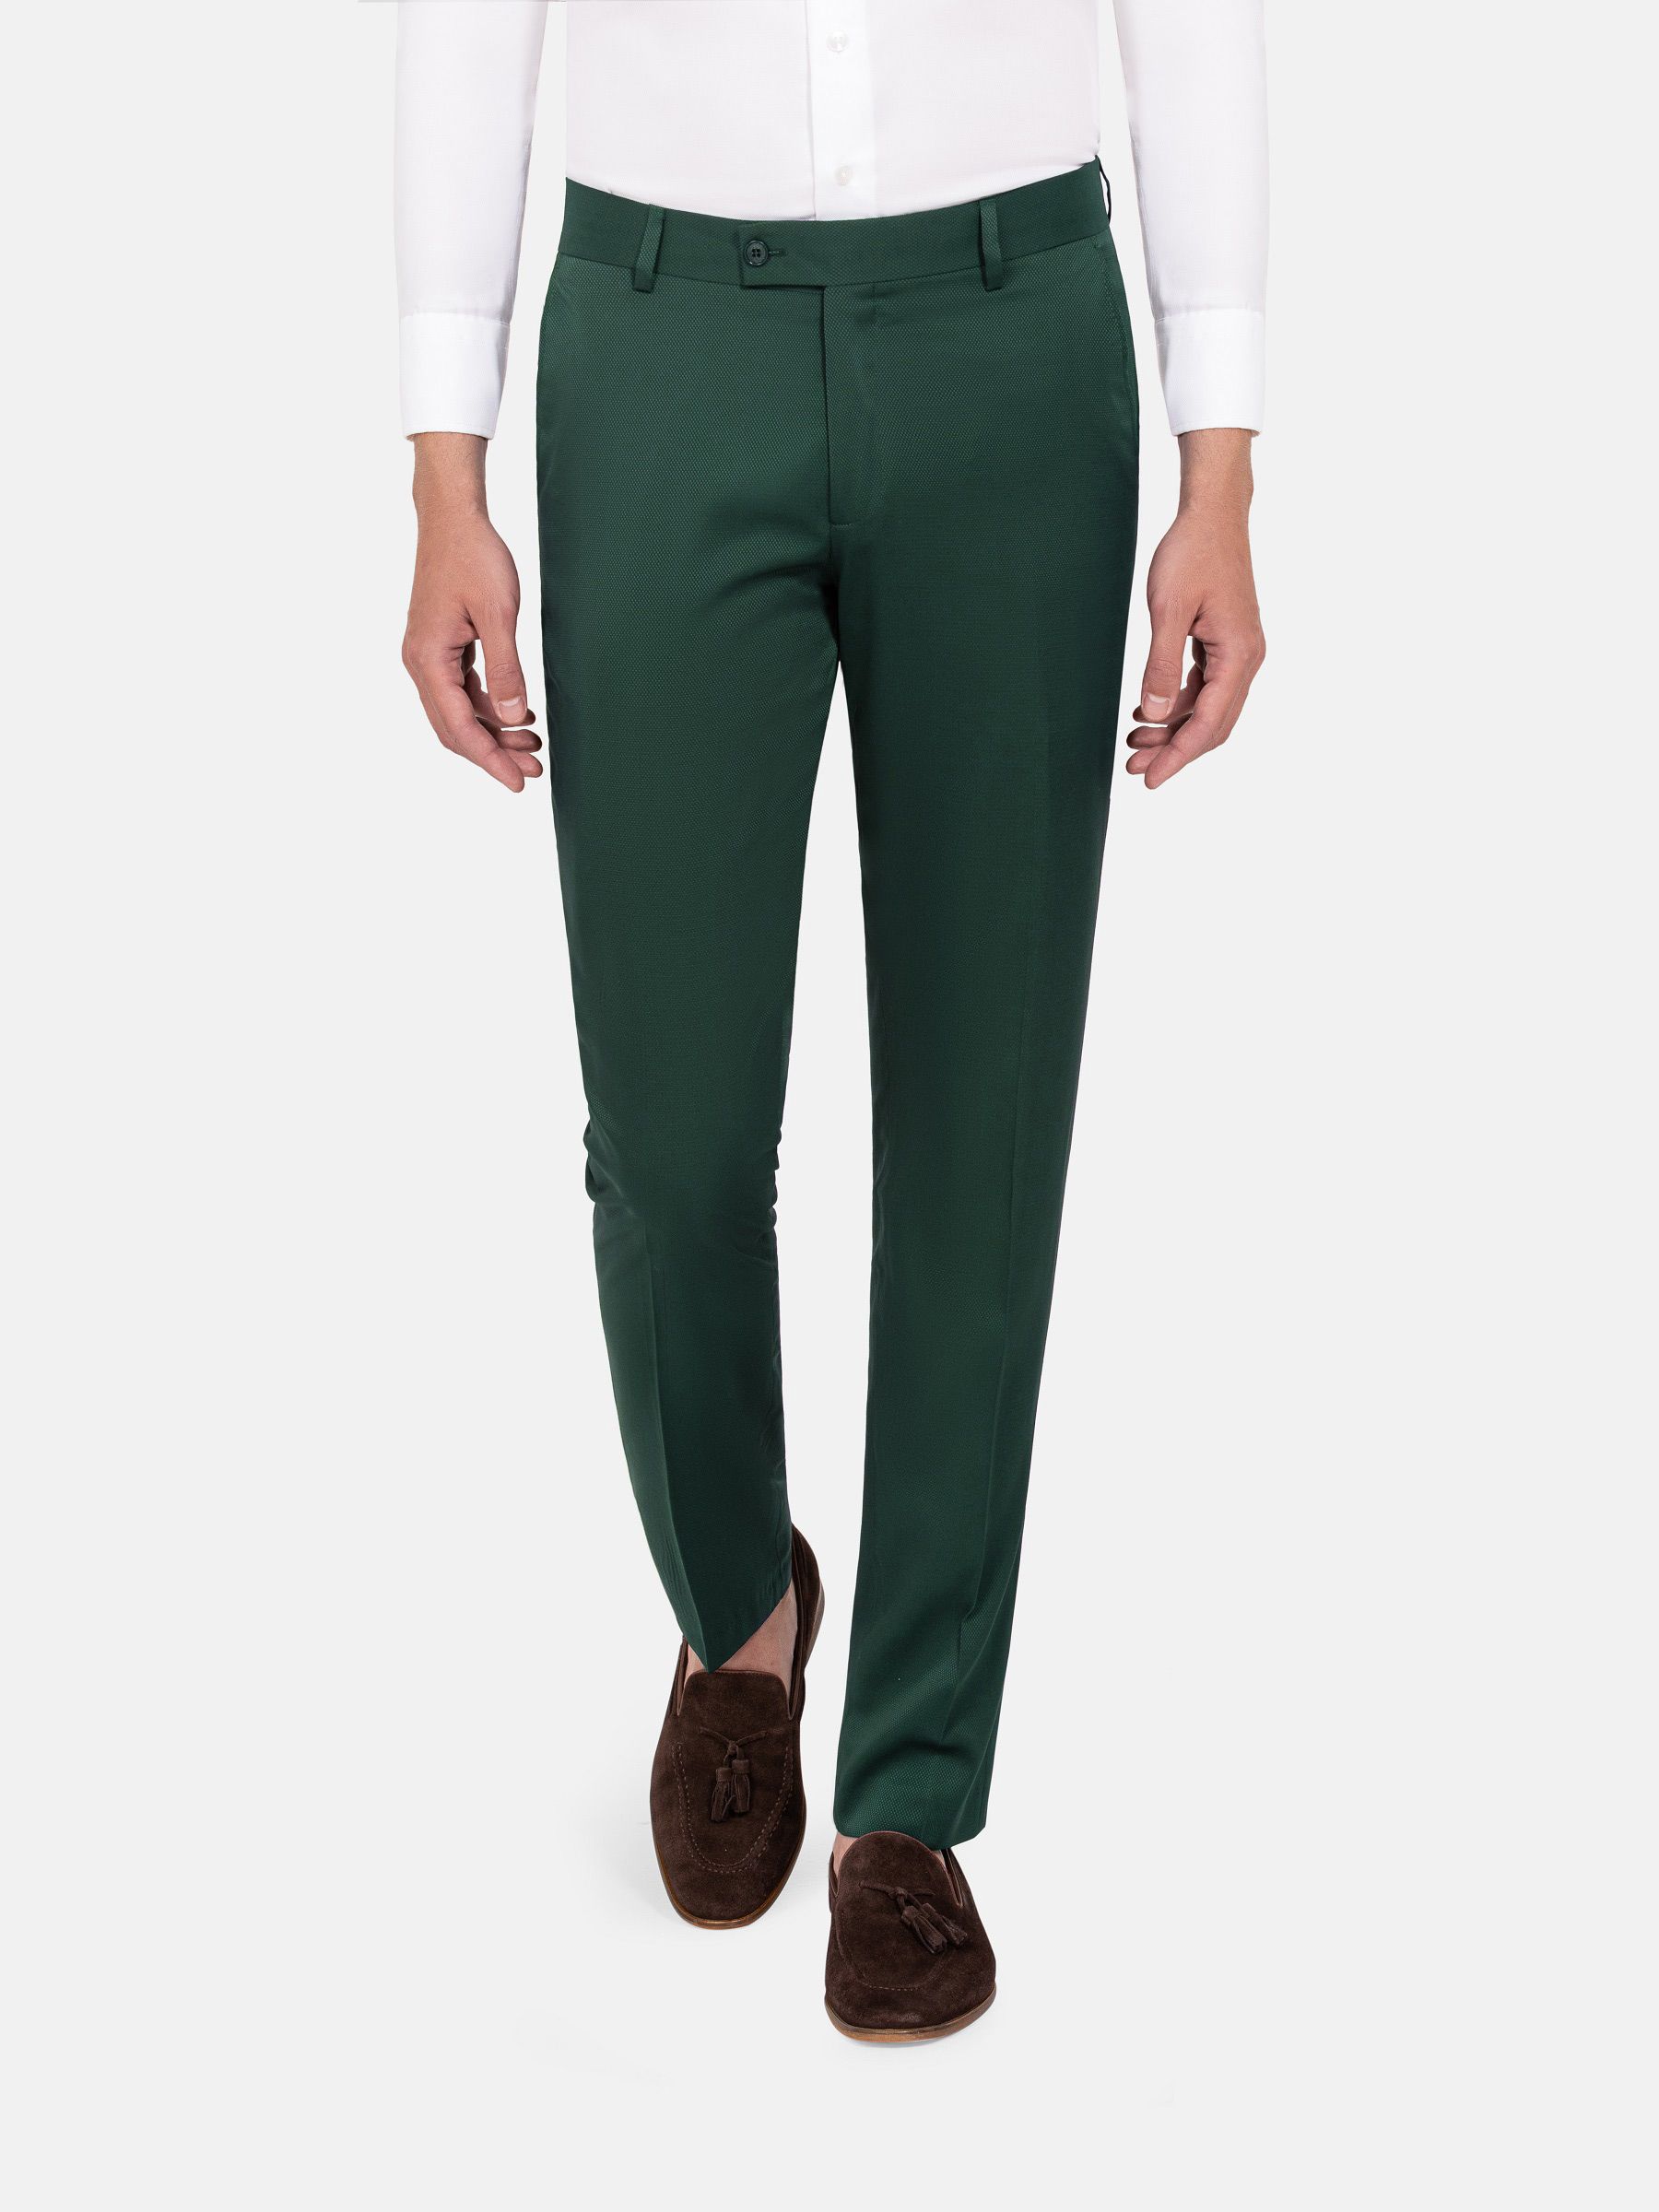 TopQore Regular Fit Men Light Green Trousers - Price History